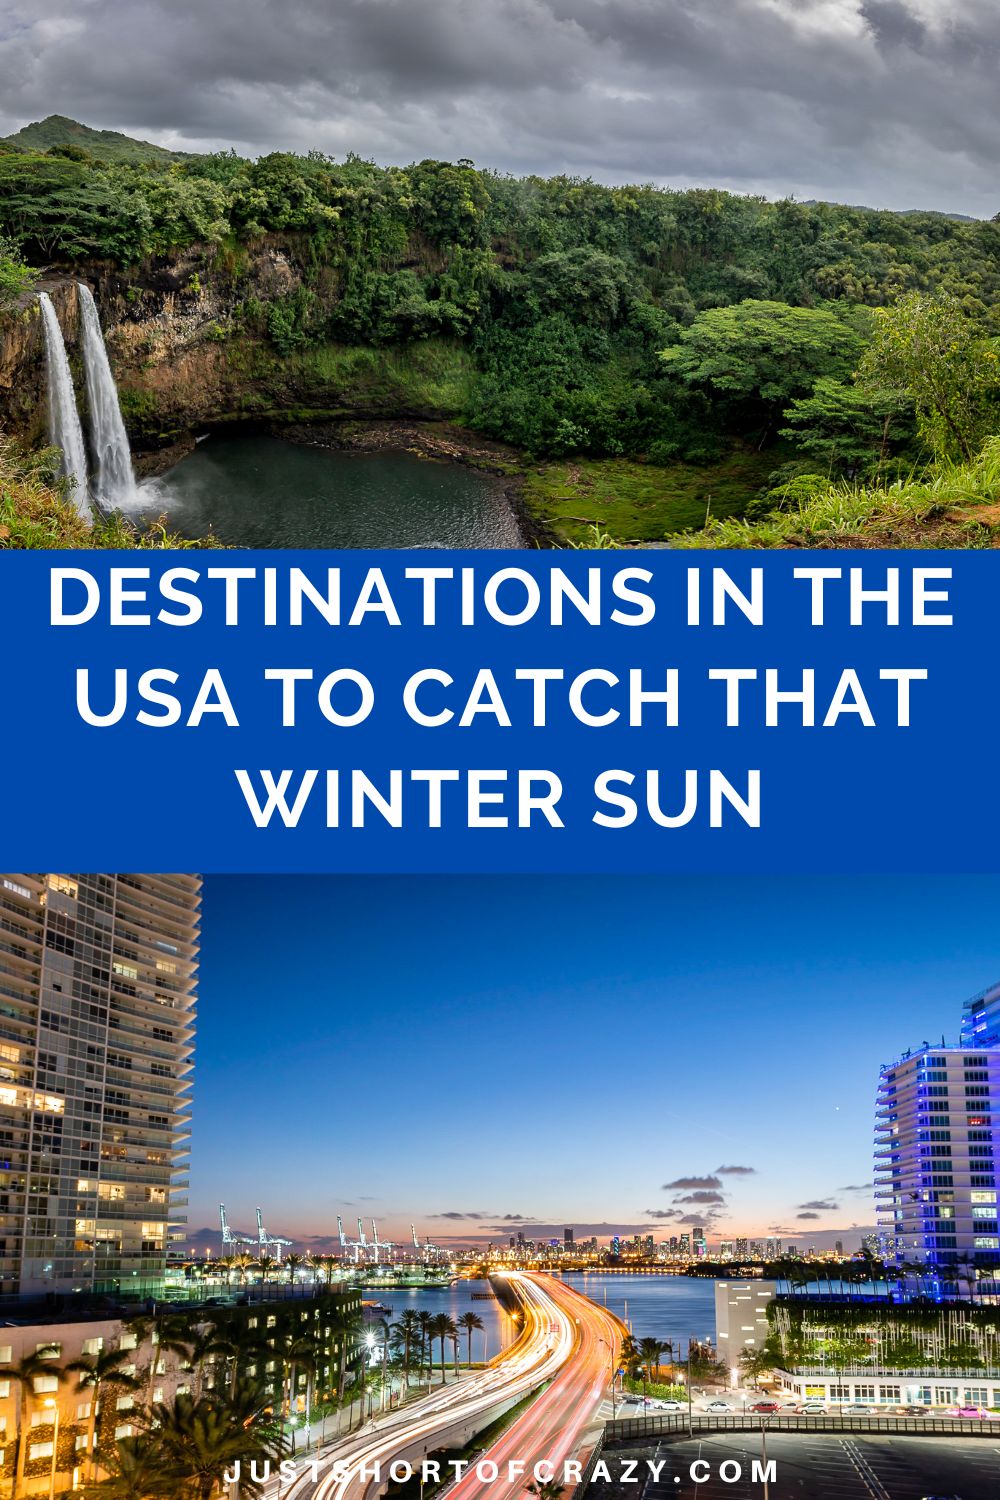 Destinations in the USA to Catch That Winter Sun